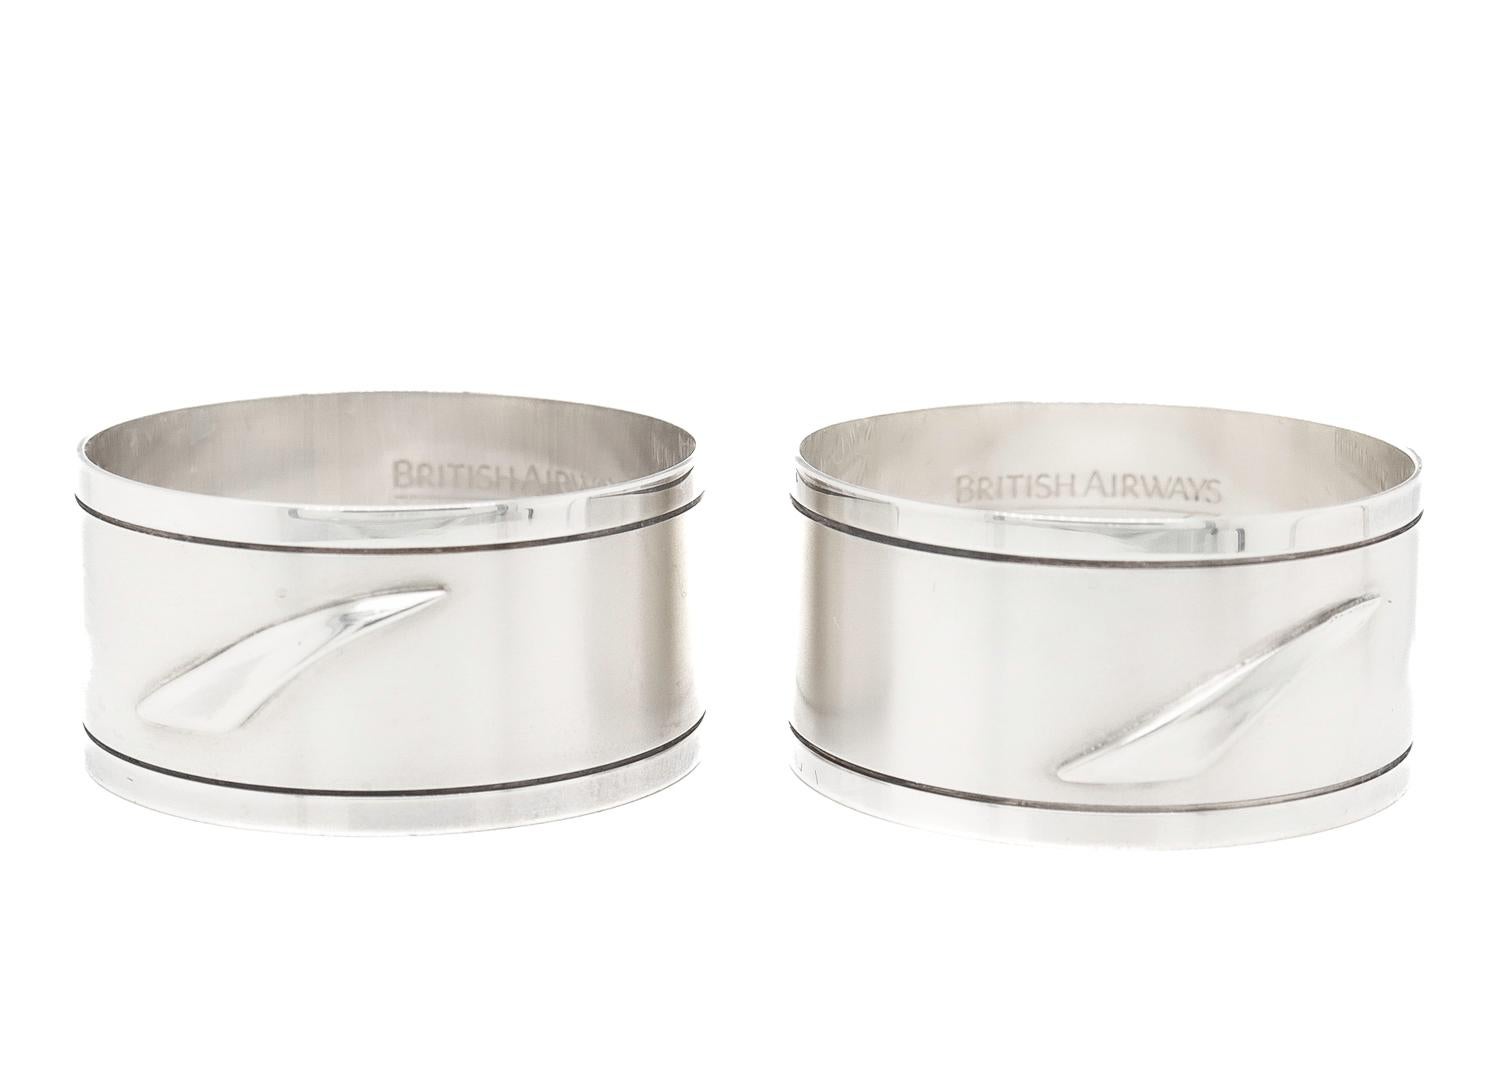 Pair British Airways Concorde Sterling Silver Napkin Rings in the Original Box For Sale 2